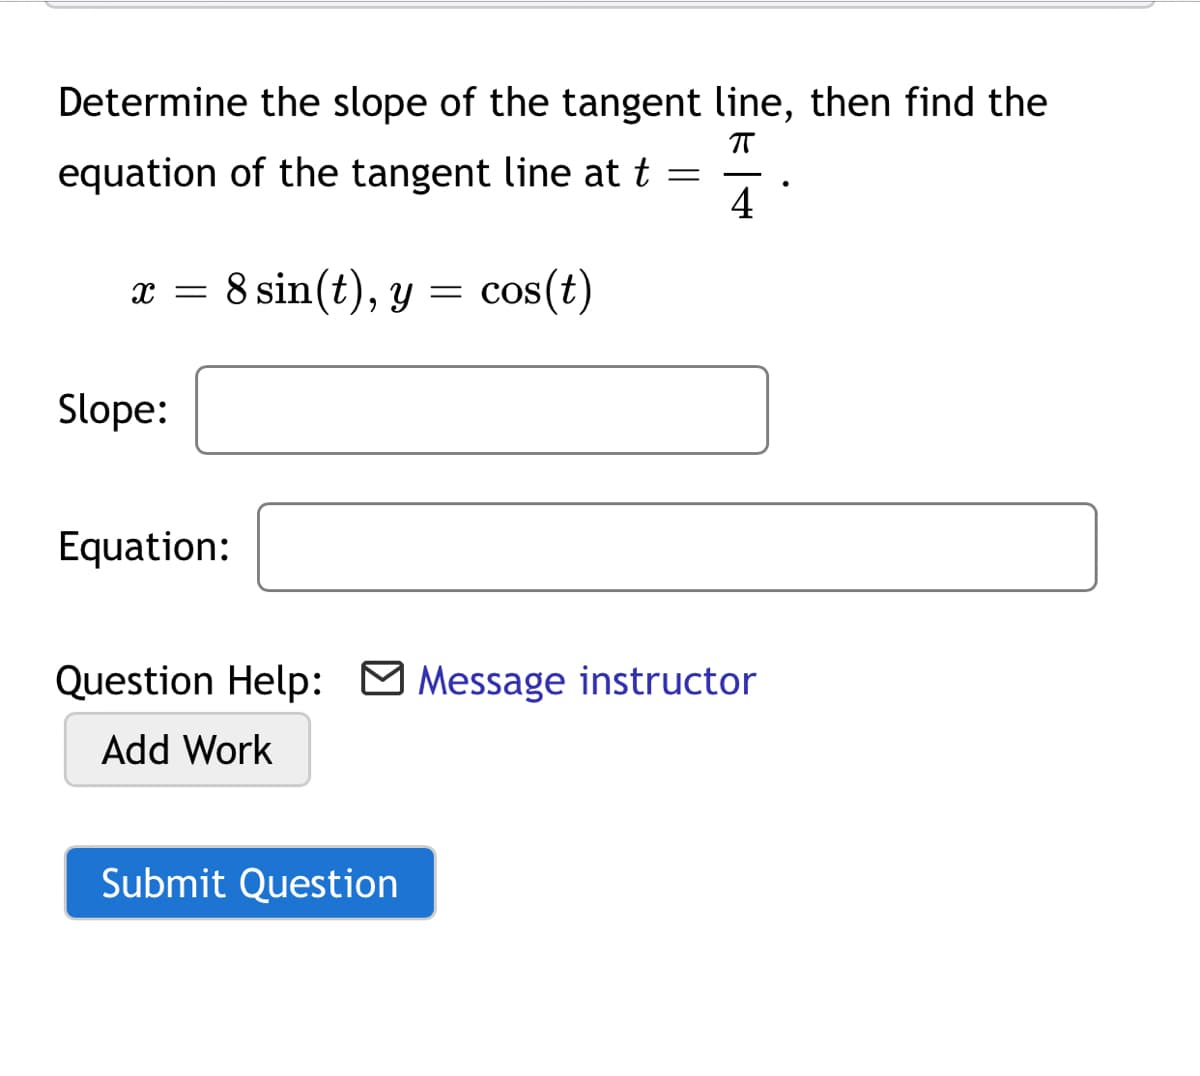 Determine the slope of the tangent line, then find the
T
equation of the tangent line at t =
4
x =
8 sin(t), y = cos(t)
Slope:
Equation:
Question Help: O Message instructor
Add Work
Submit Question
